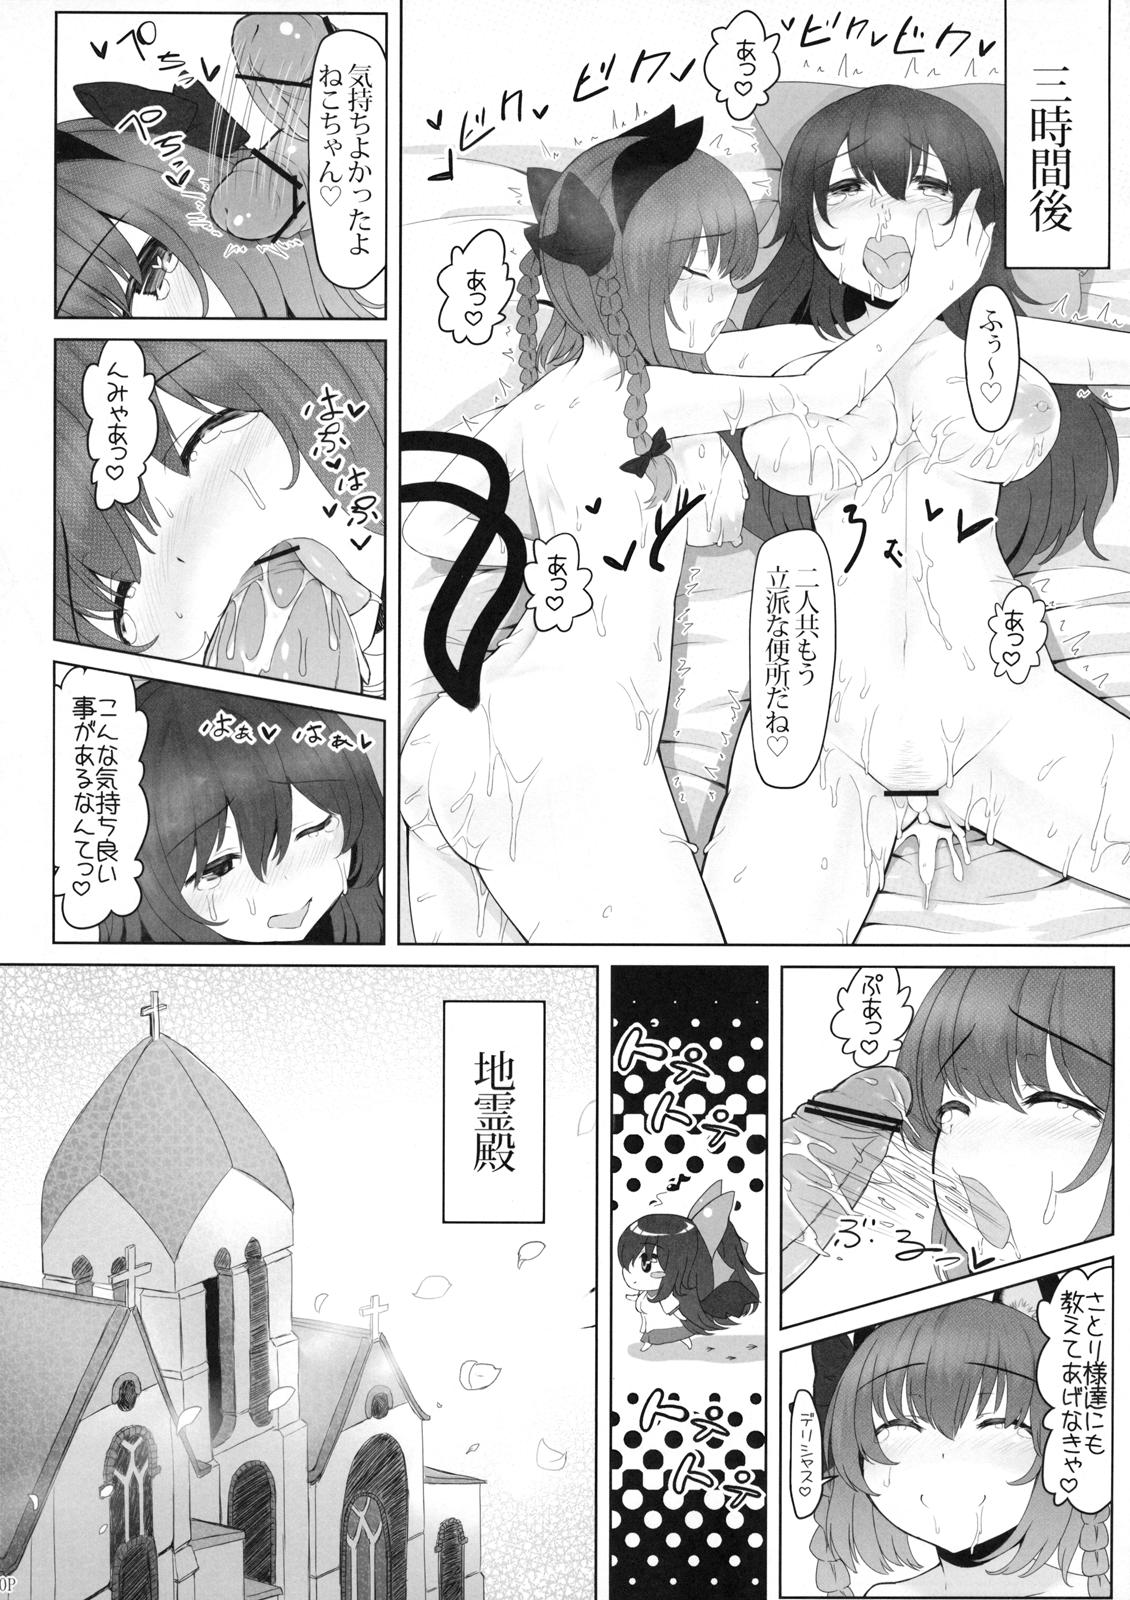 Hoe KKMK vol.5 - Touhou project Pissing - Page 12